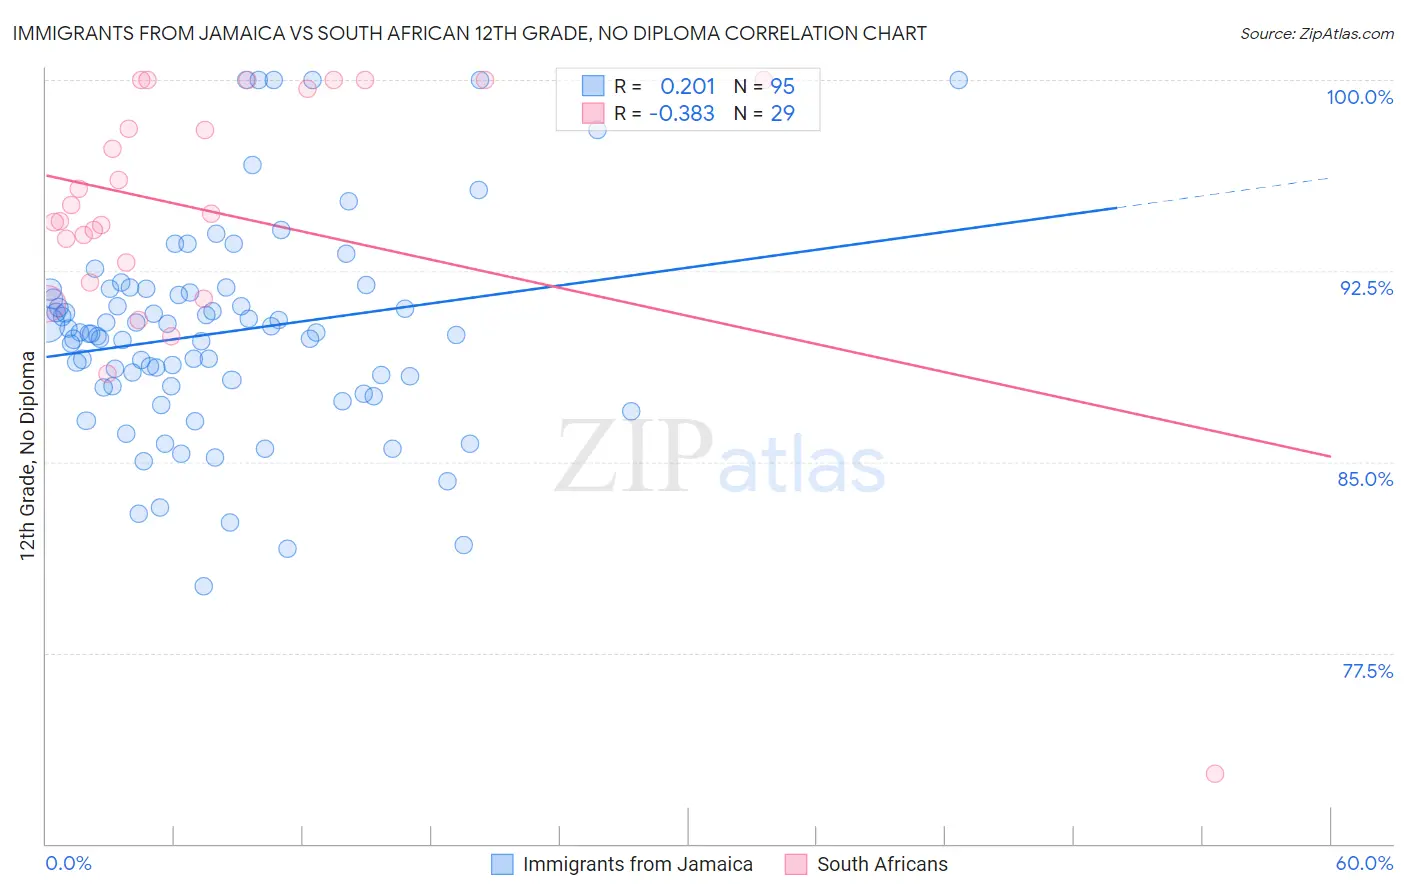 Immigrants from Jamaica vs South African 12th Grade, No Diploma